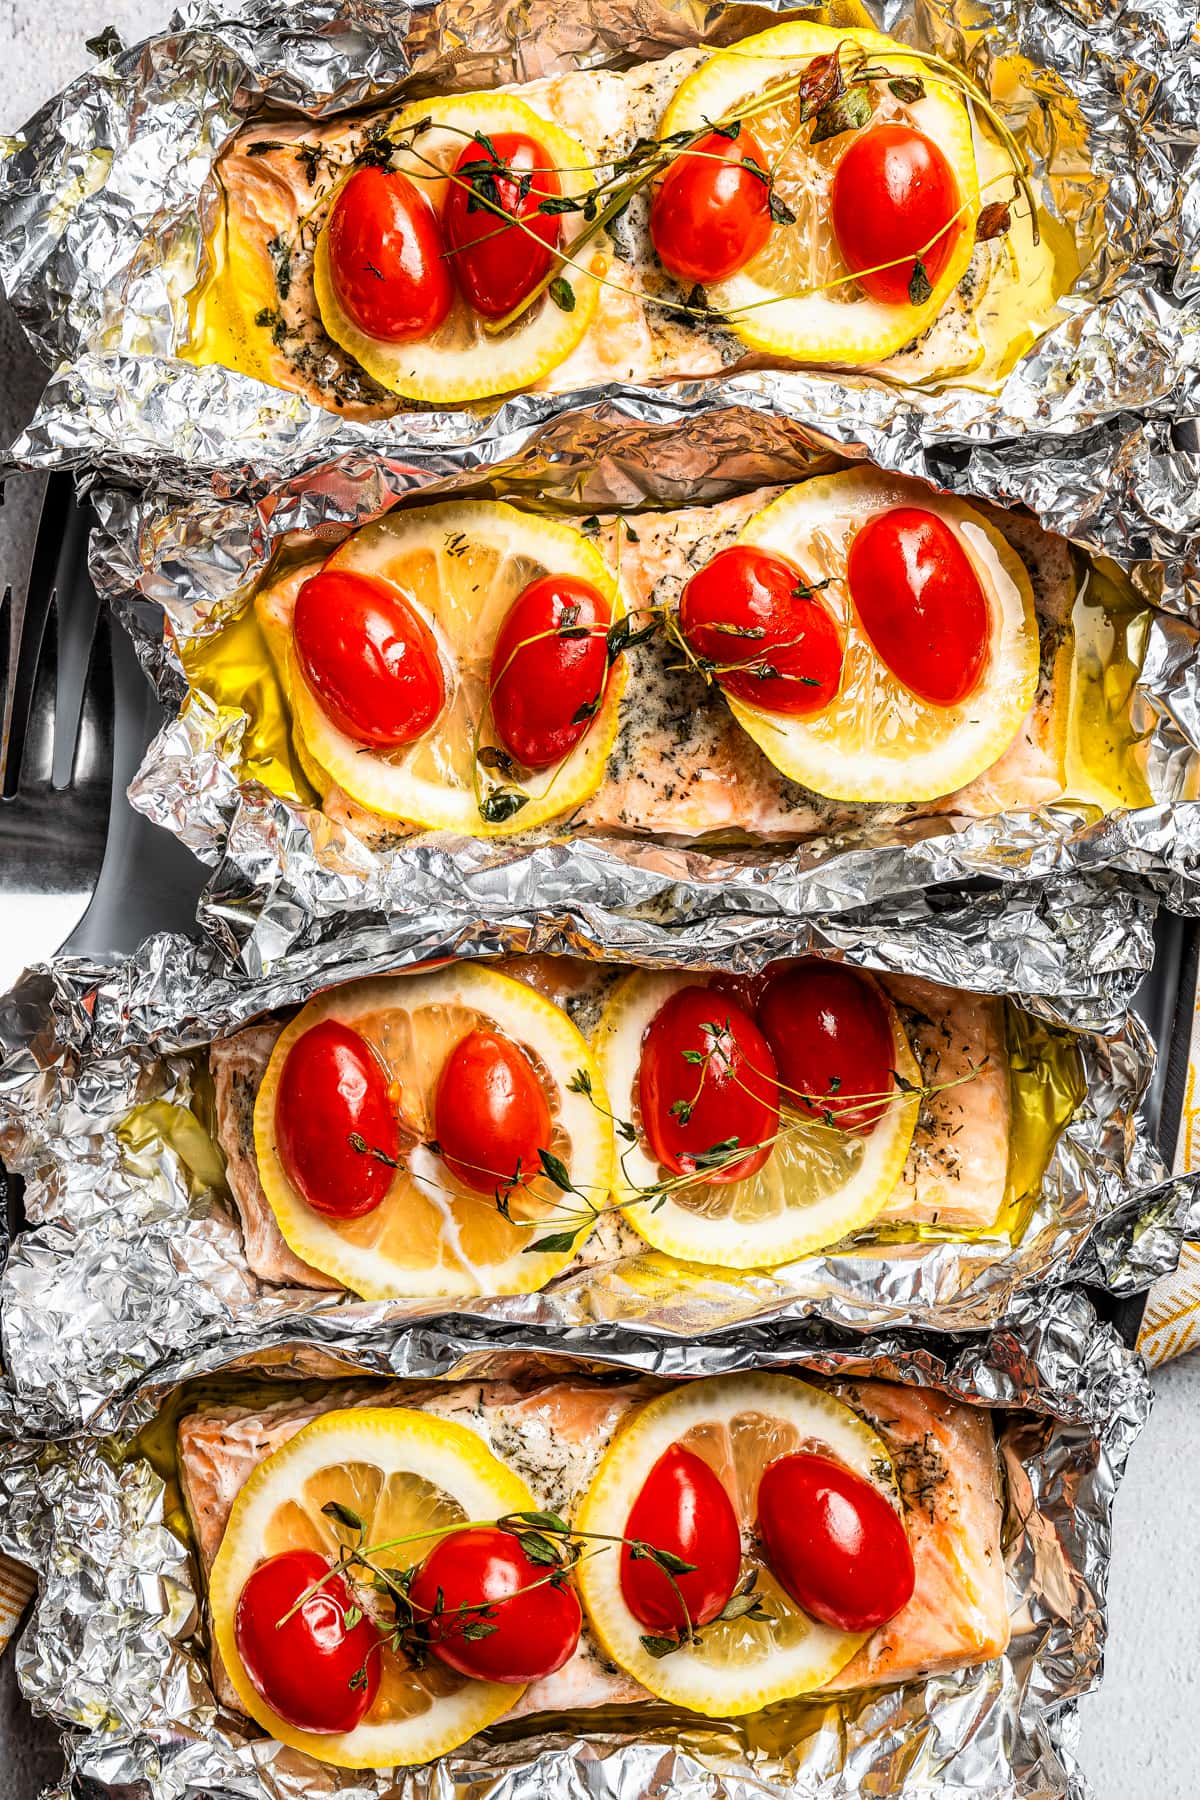 Overhead, close-up view of baked lemon pepper salmon fillets topped with lemon slices, tomatoes, and thyme inside unwrapped foil packets.